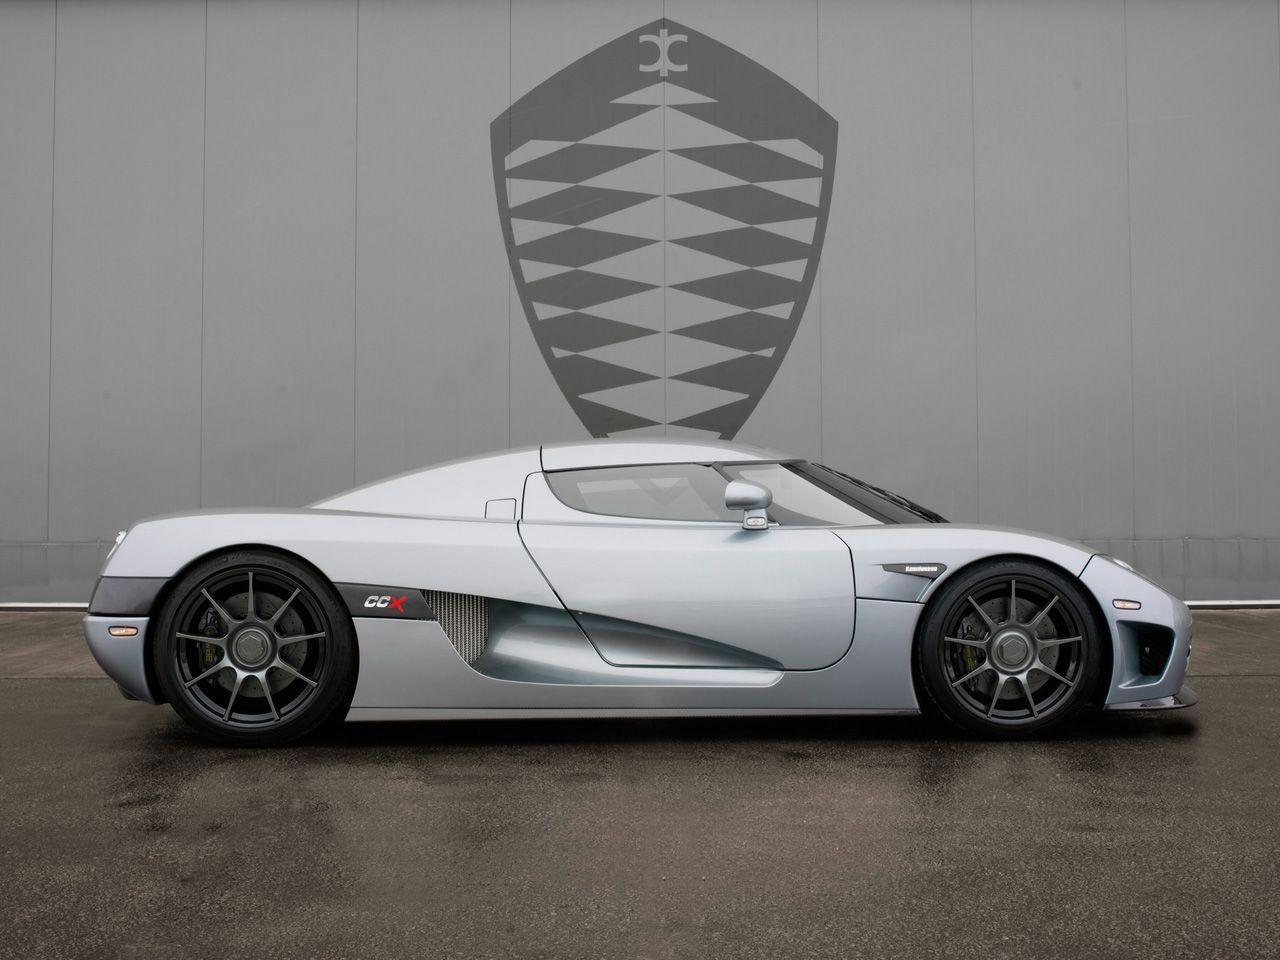 The Koenigsegg CCXWallpaper for wallpapers and backgrounds